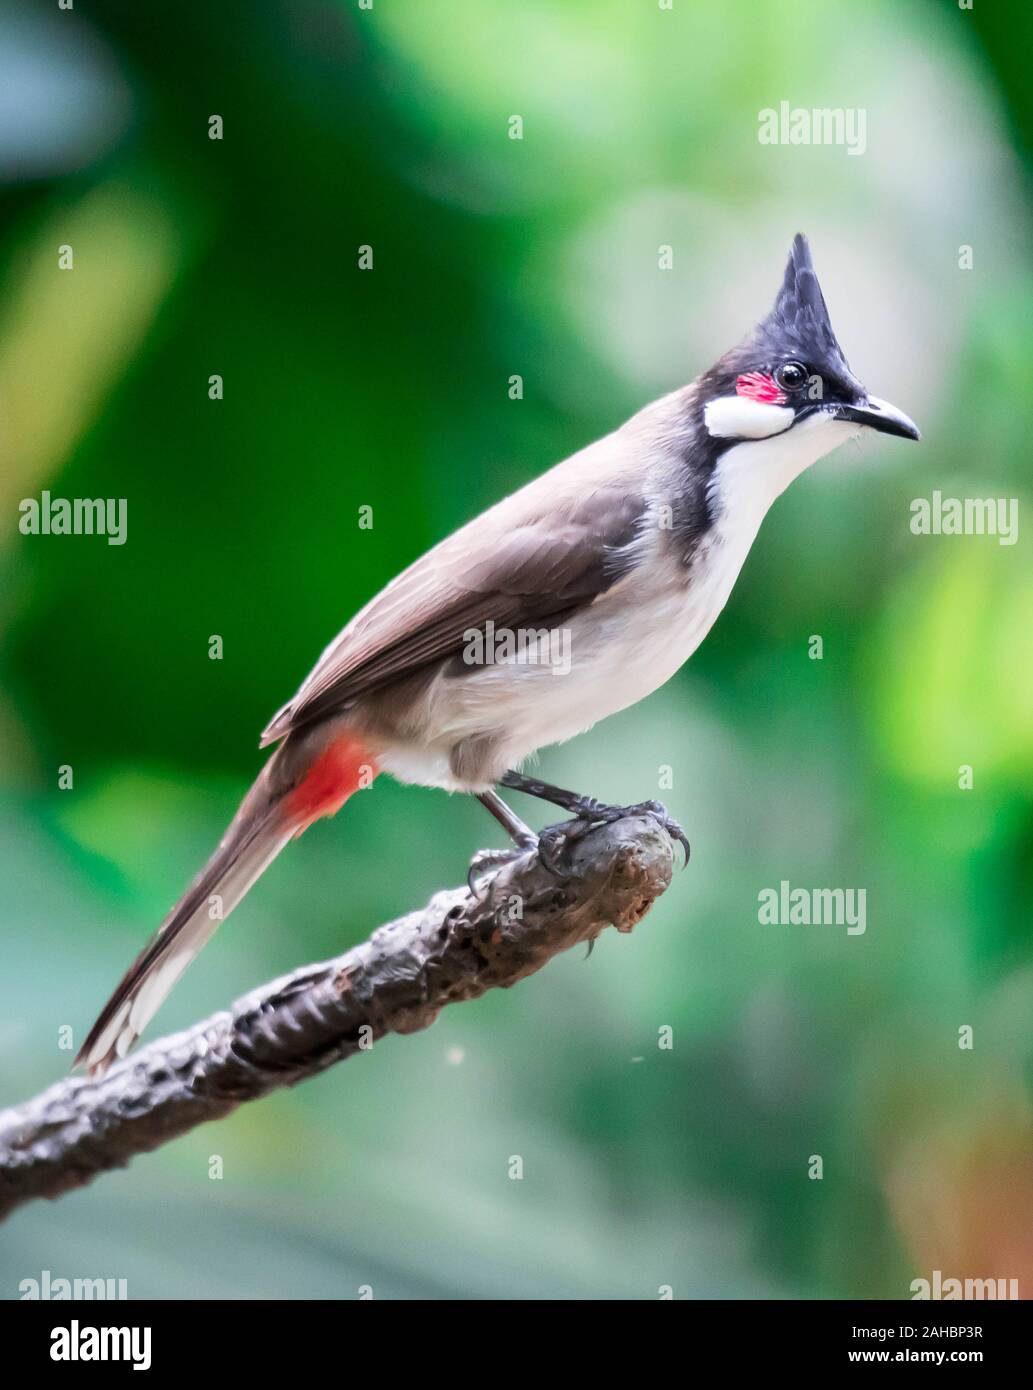 A Red-whiskered Bulbul bird is a passerine bird found in Asia Stock Photo